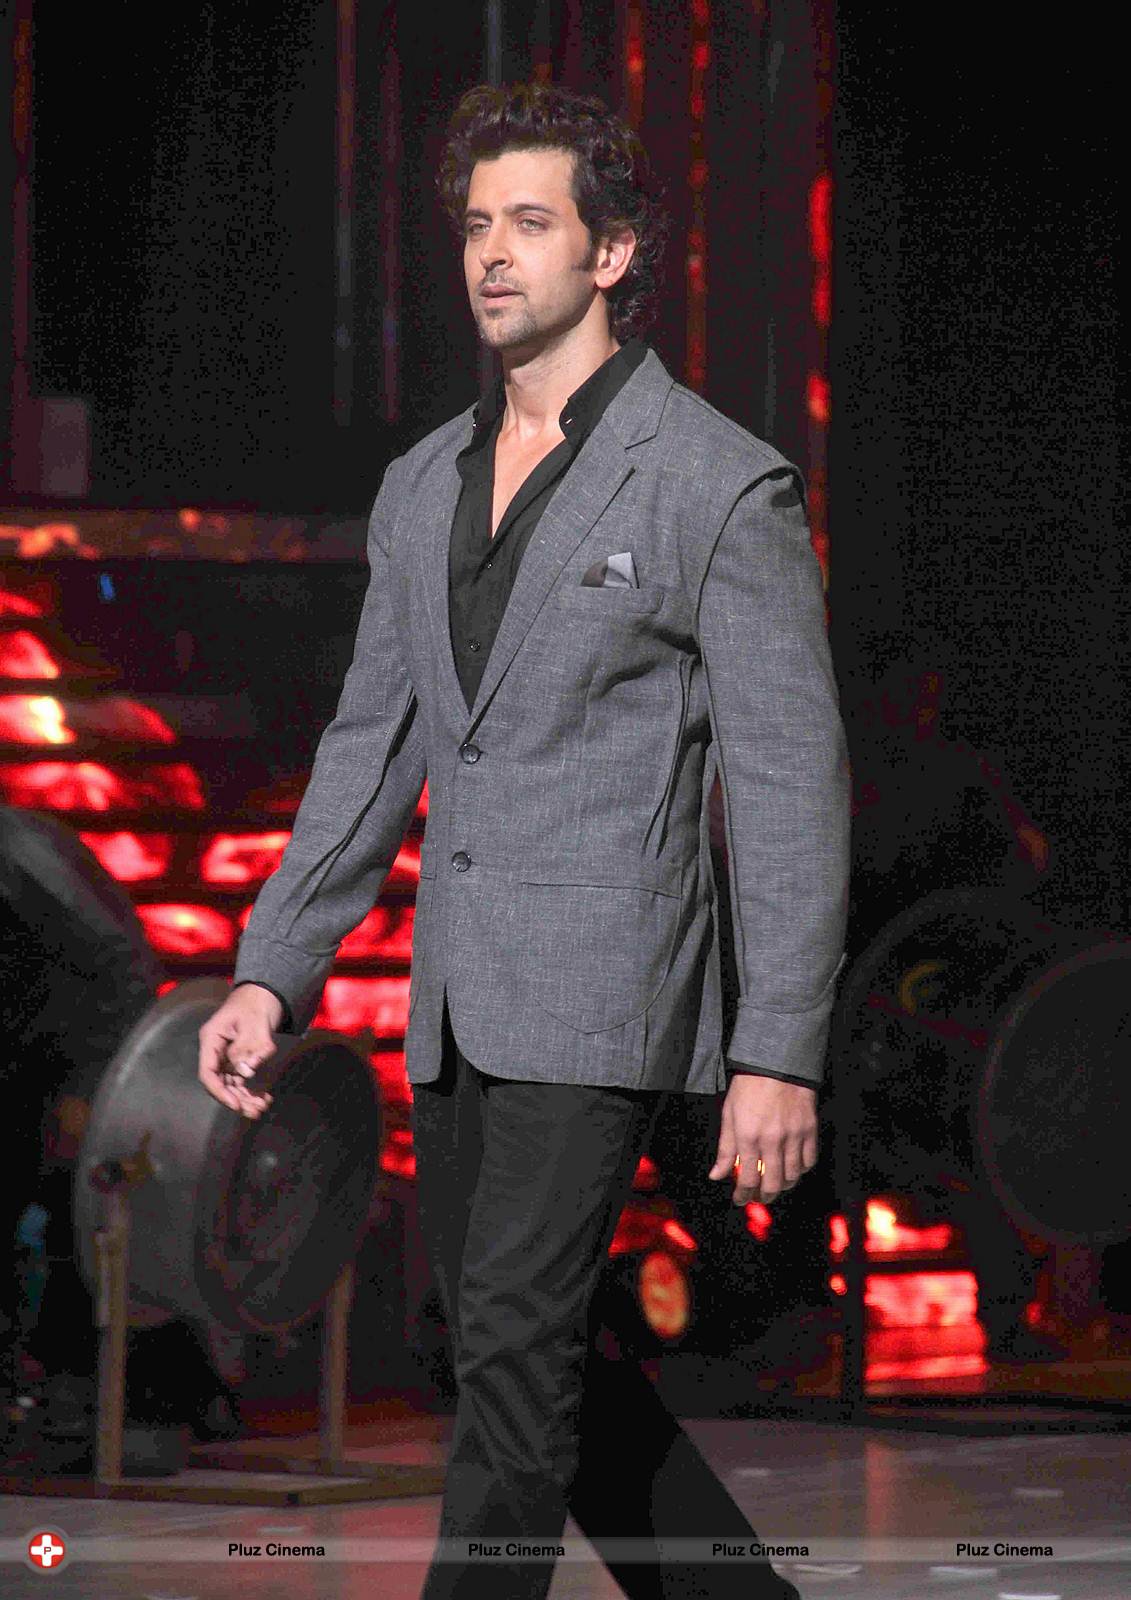 Hrithik Roshan - Promotion of film Krrish 3 on the sets of Jhalak Dikhhla Jaa | Picture 571182